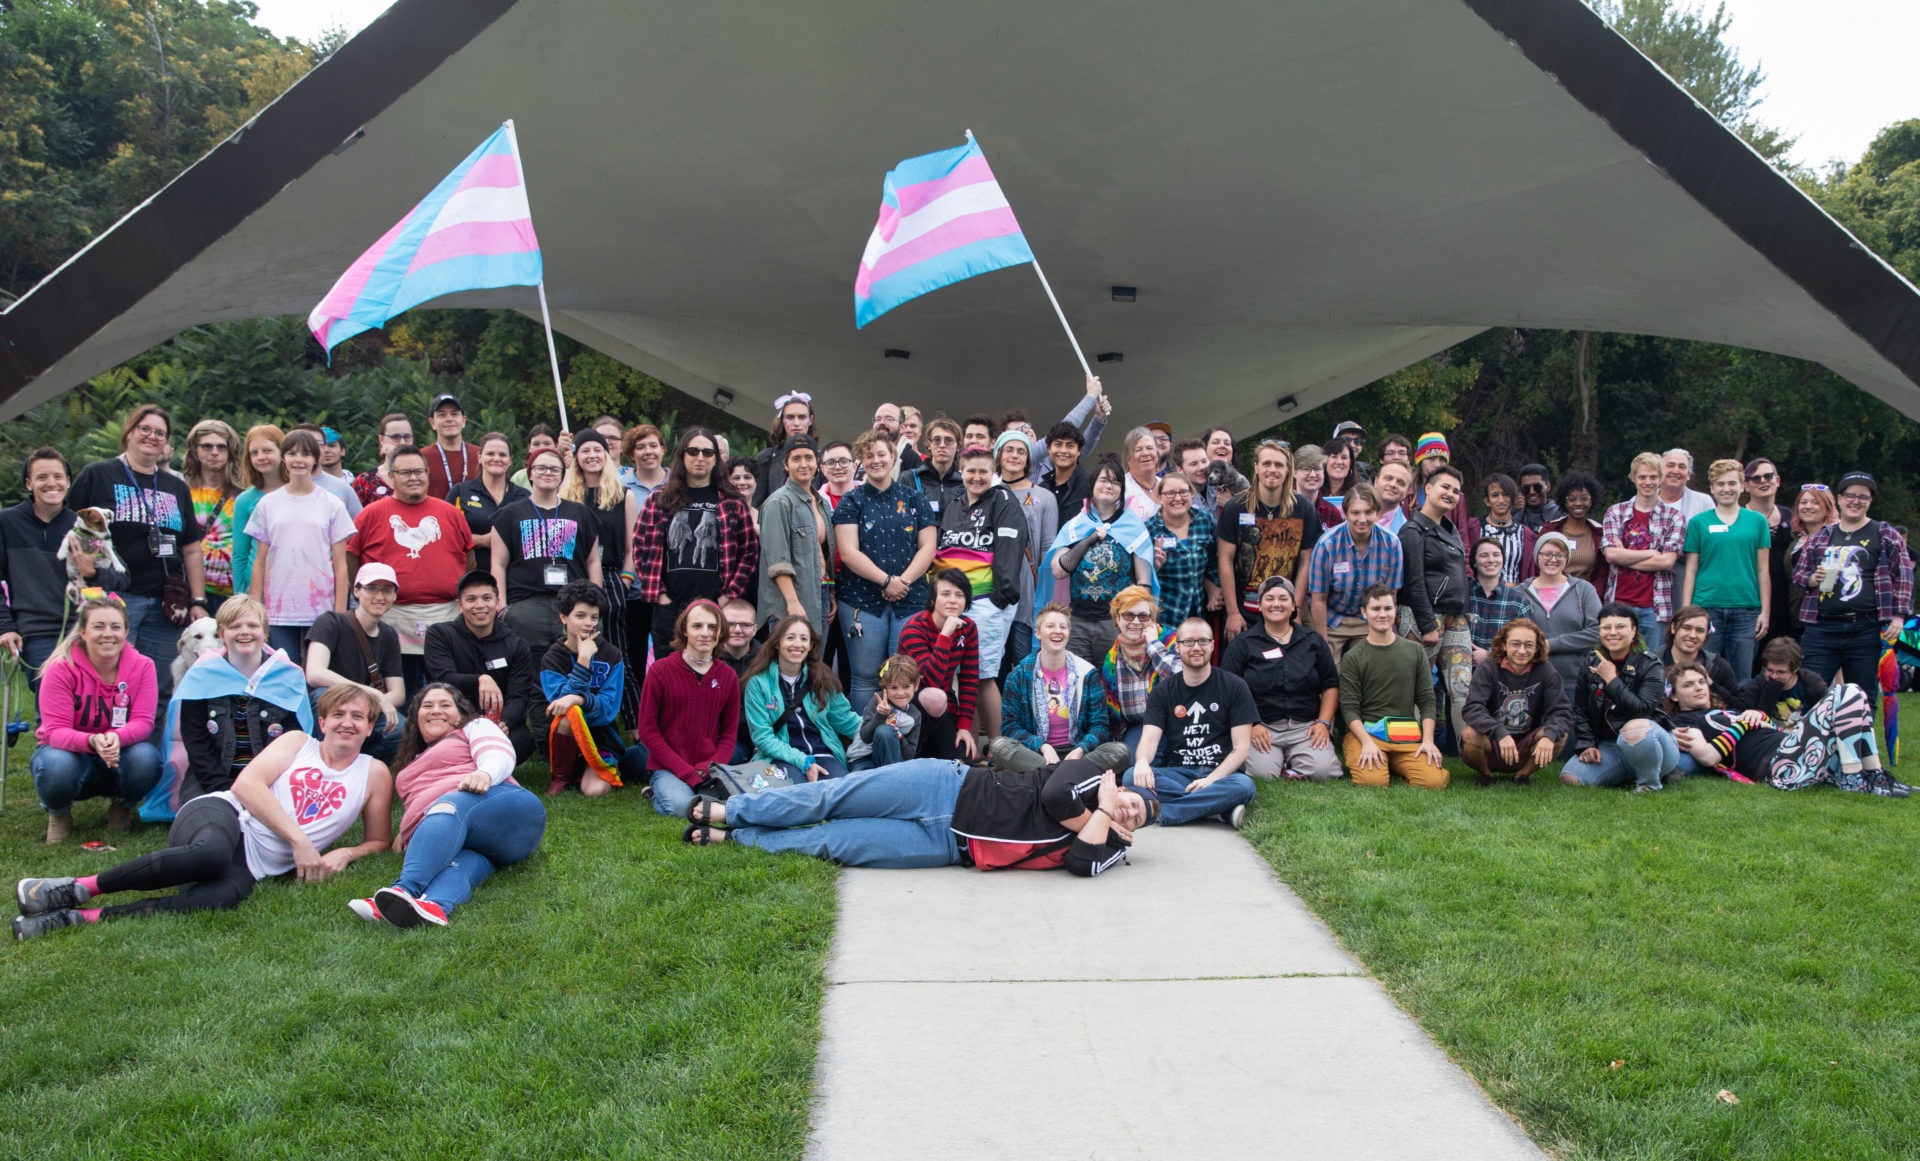 Utah's first transgender pride festival hosted in Provo The Daily